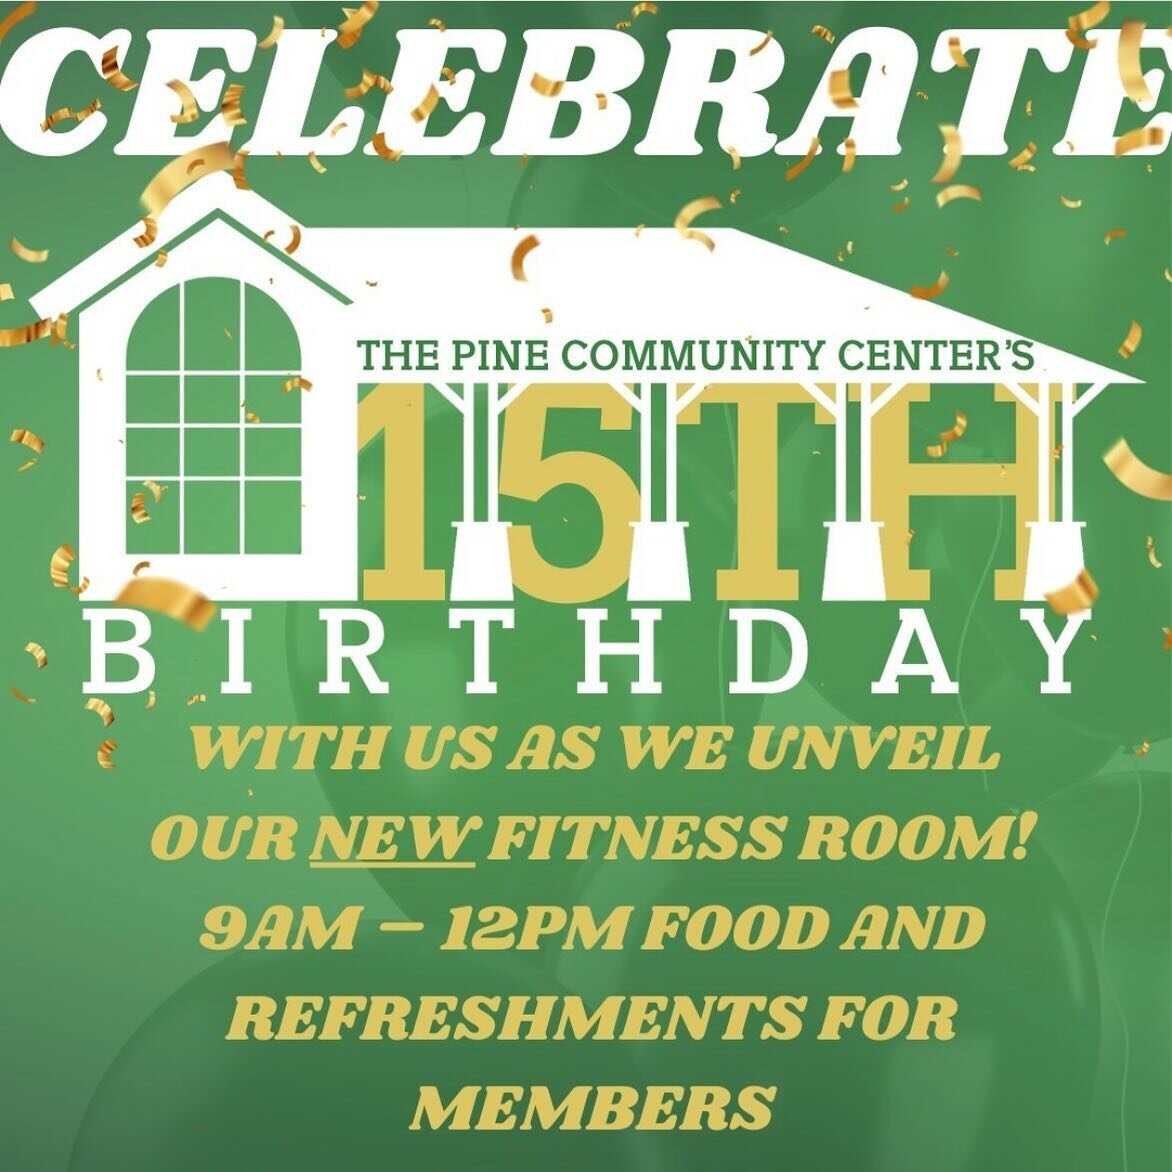 🎉 The SBCBA sends warm birthday wishes to the Pine Township Community Center! 🎂🥳 Congratulations on 15 years of community strength and growth. Exciting news - the new fitness room is a fantastic addition! 💪 Thank you for being a hub of community 